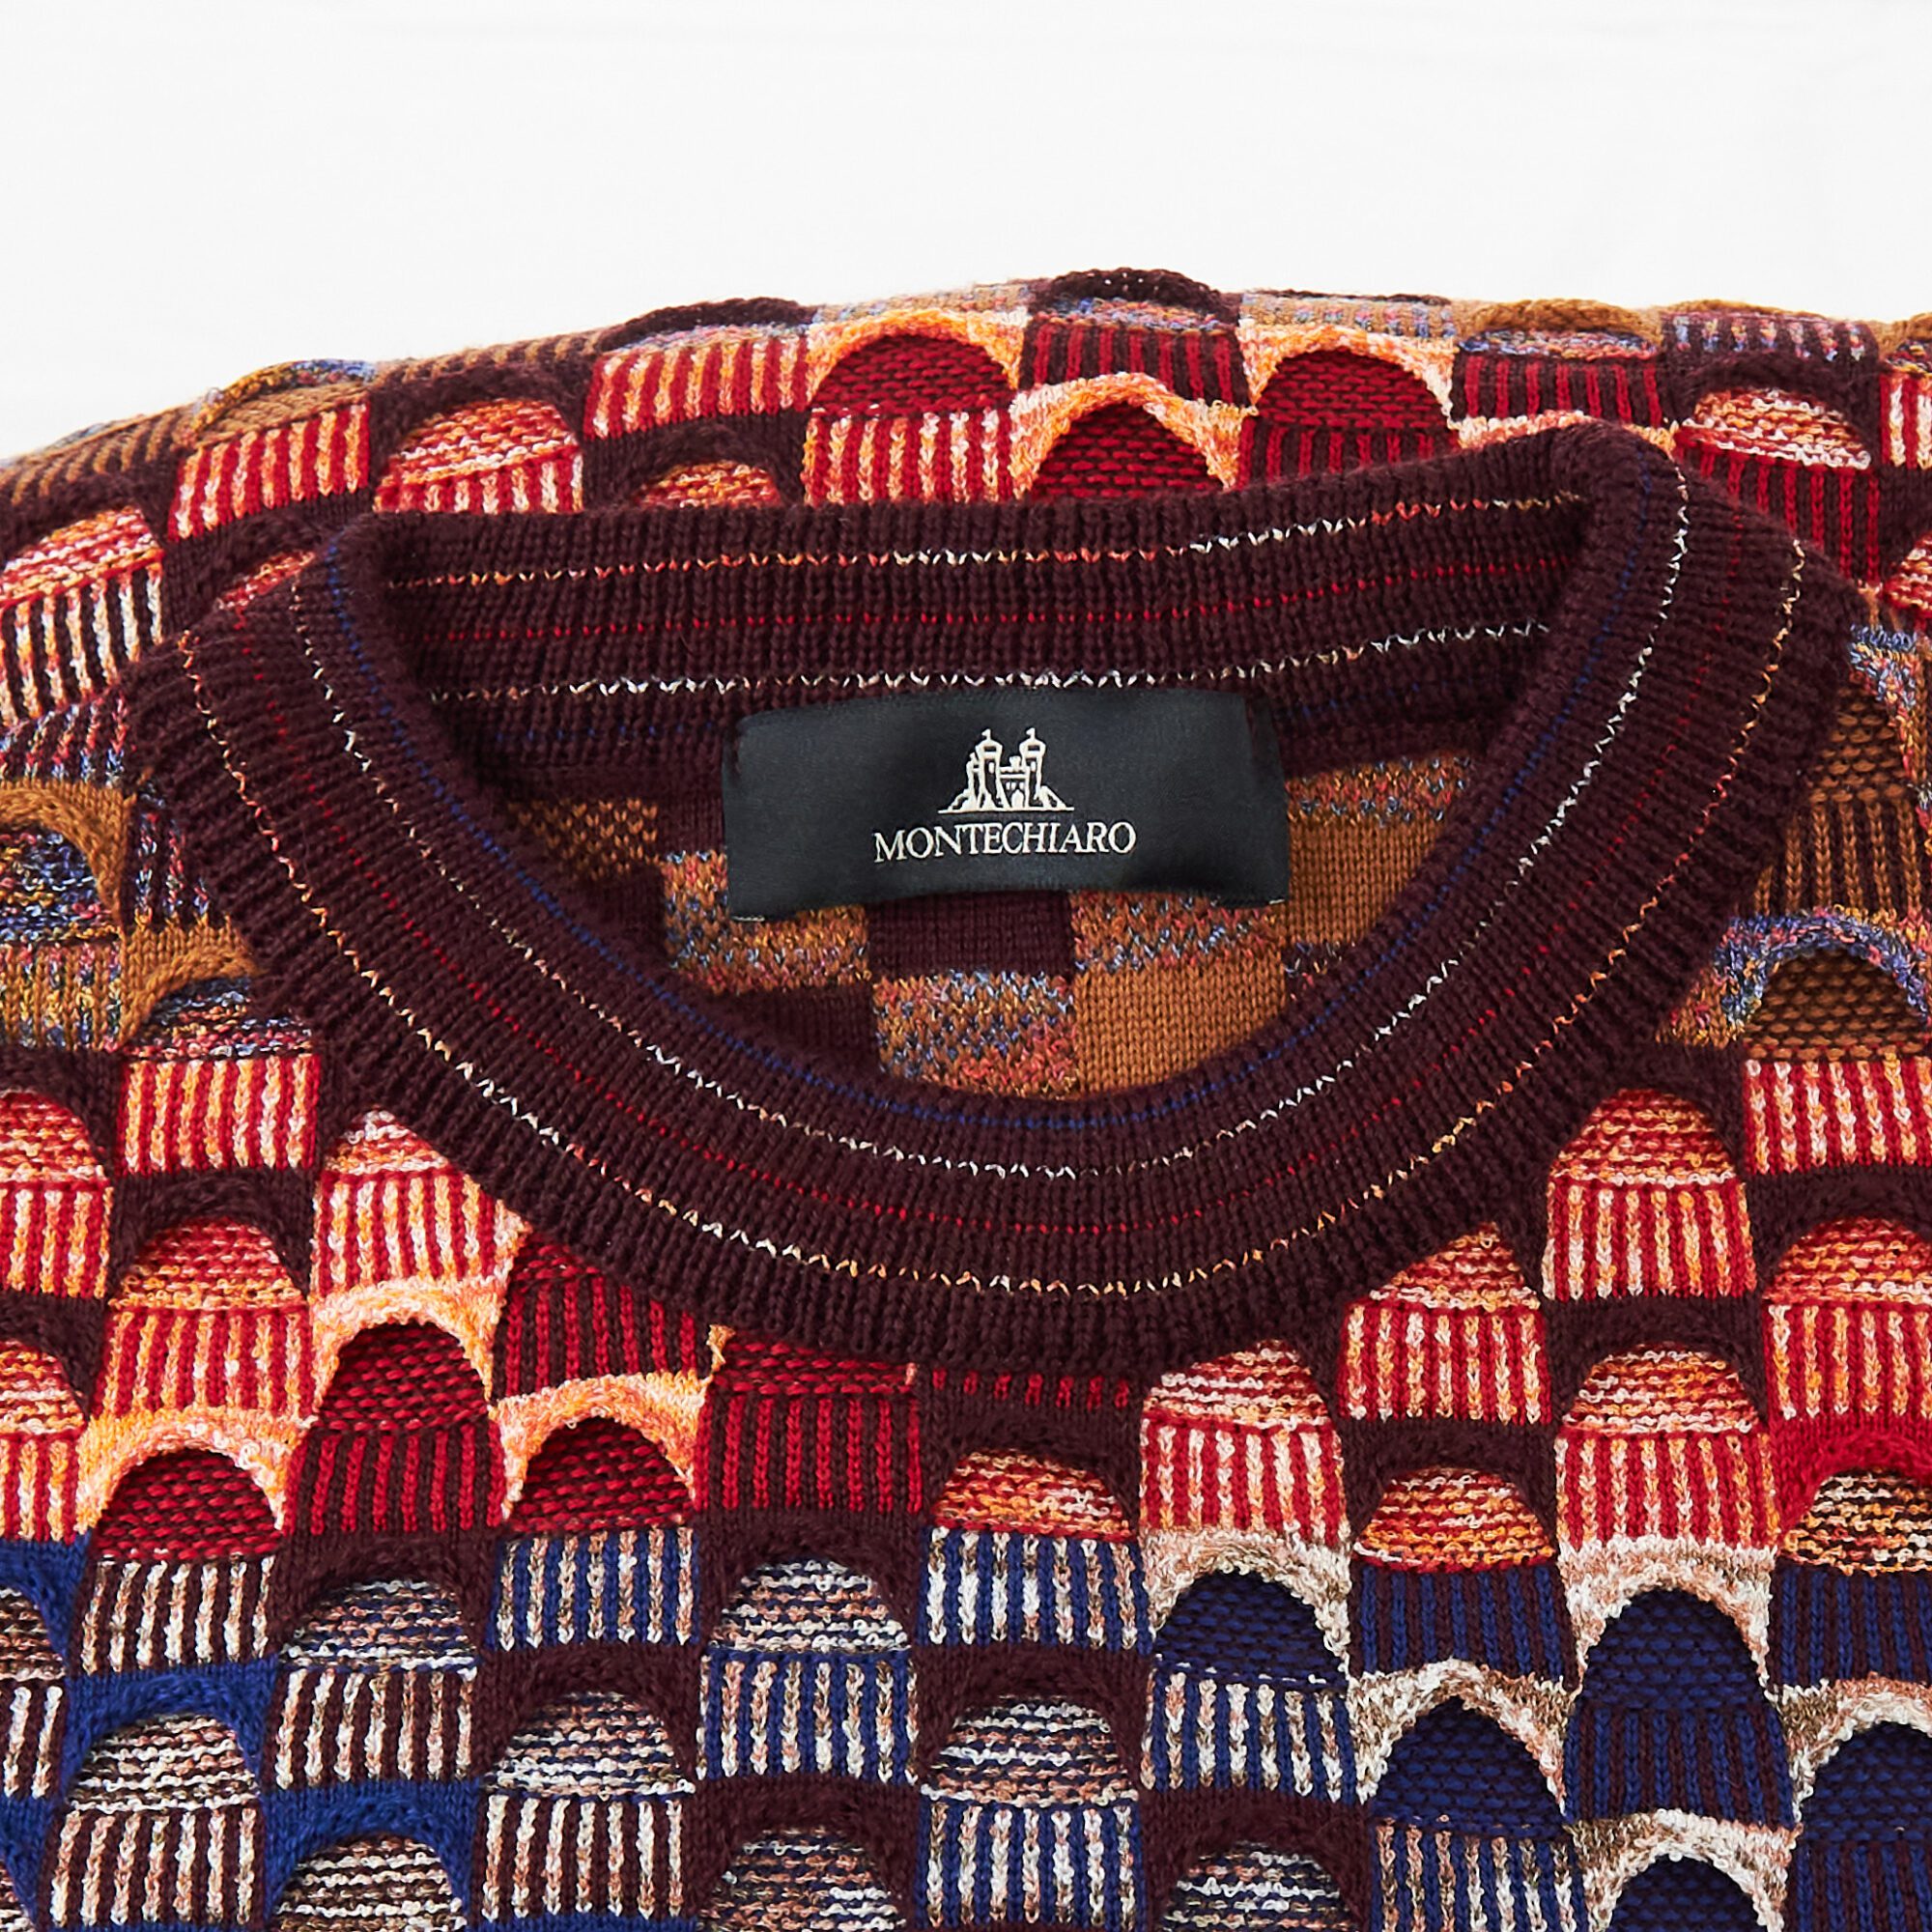 Montechiaro jumper with classic 3d design in red and blue, luxury Italian knitwear, beautifully designed and made. From Gabucci Bath.